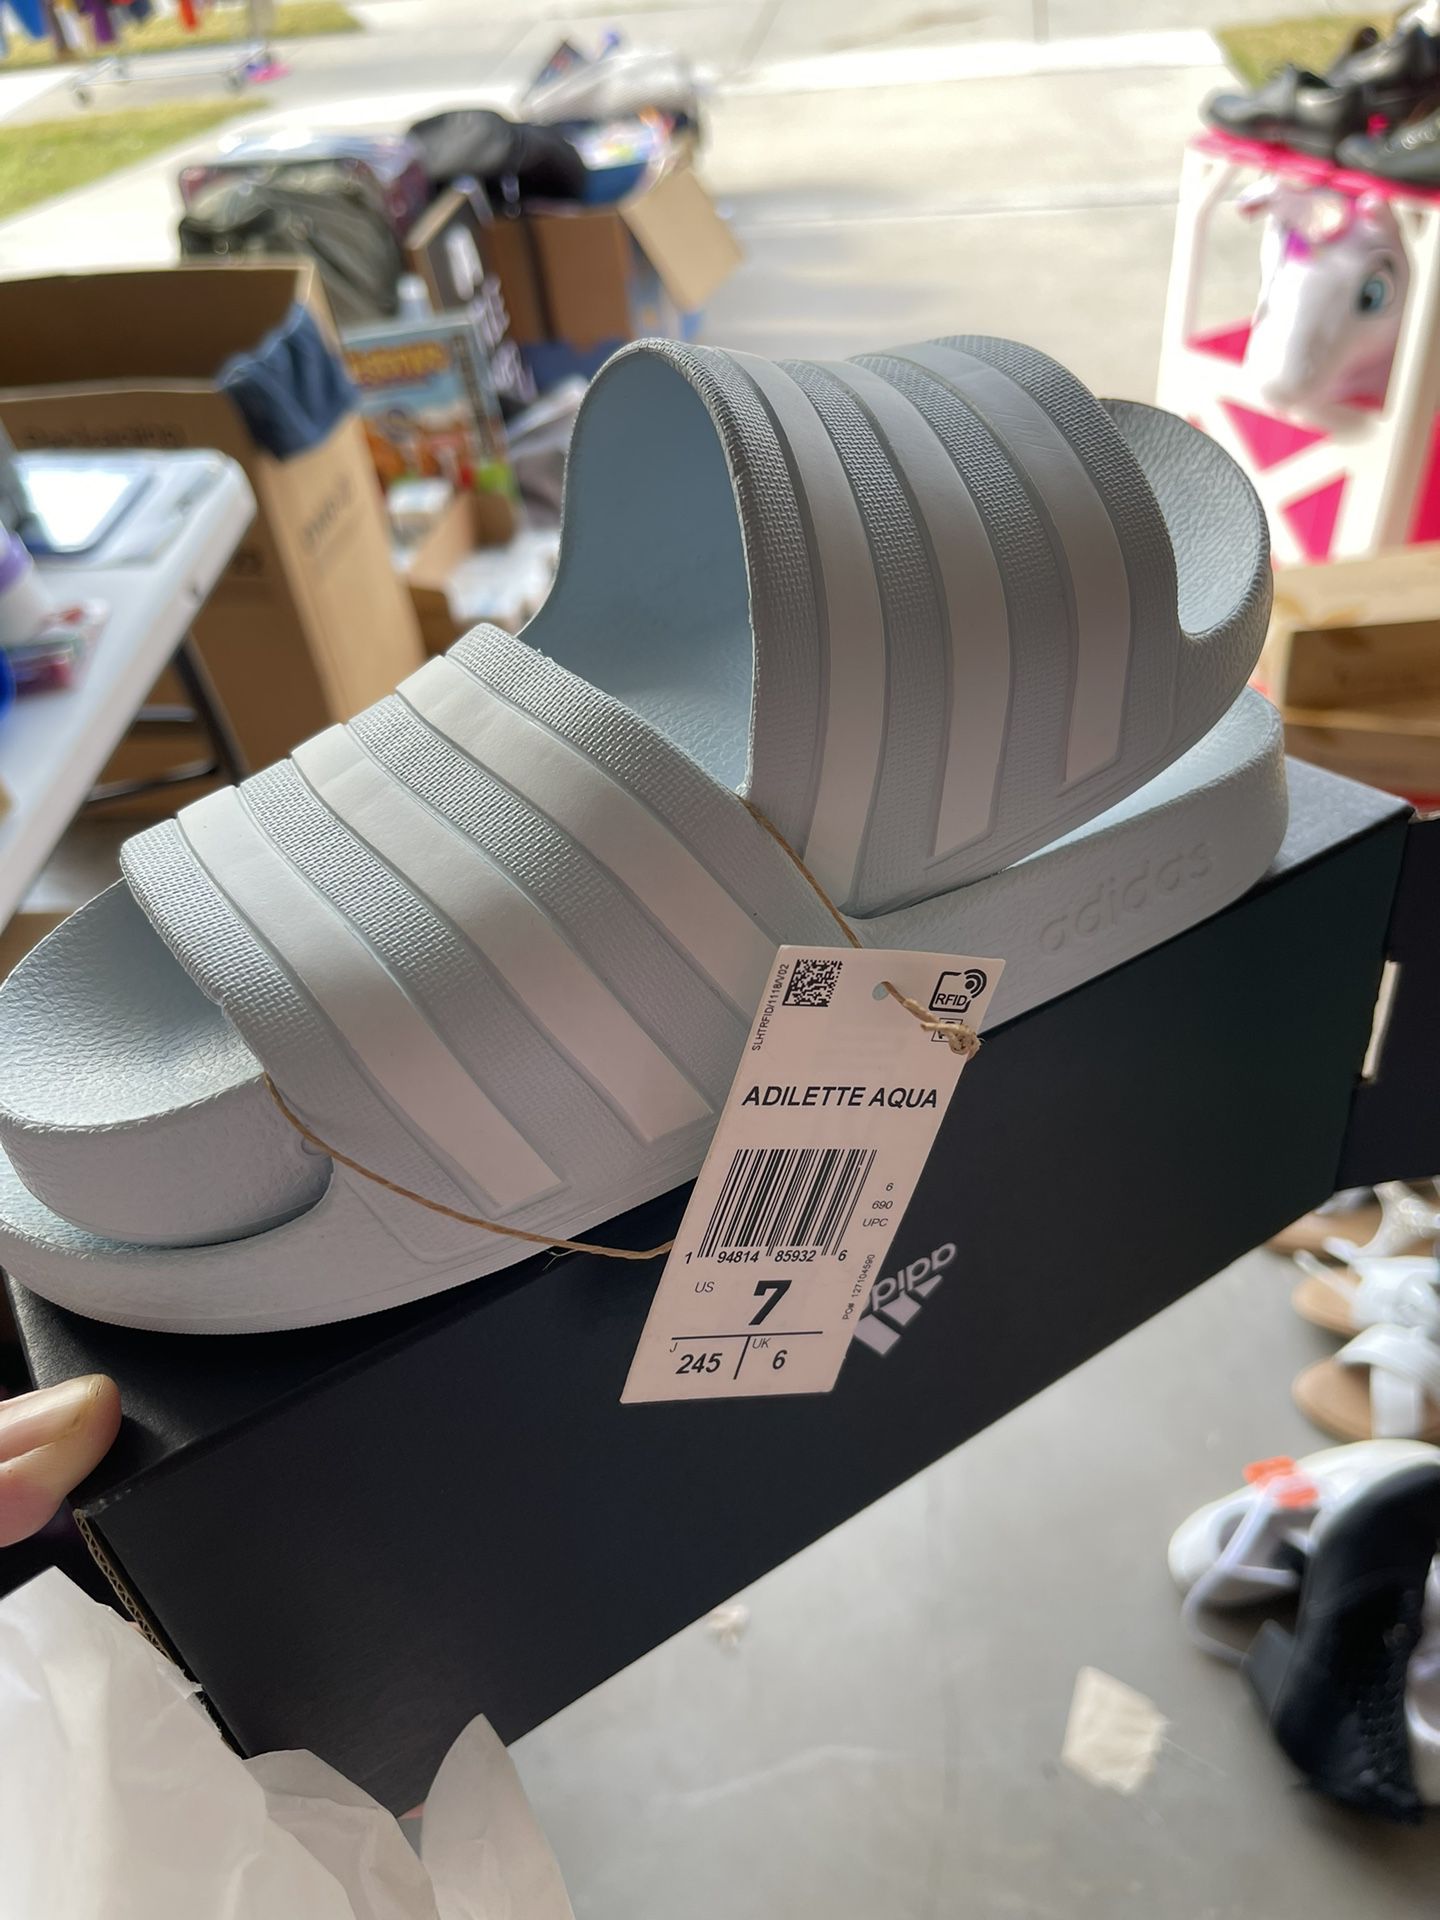 Adidas Slide $15 Brand New In A Box